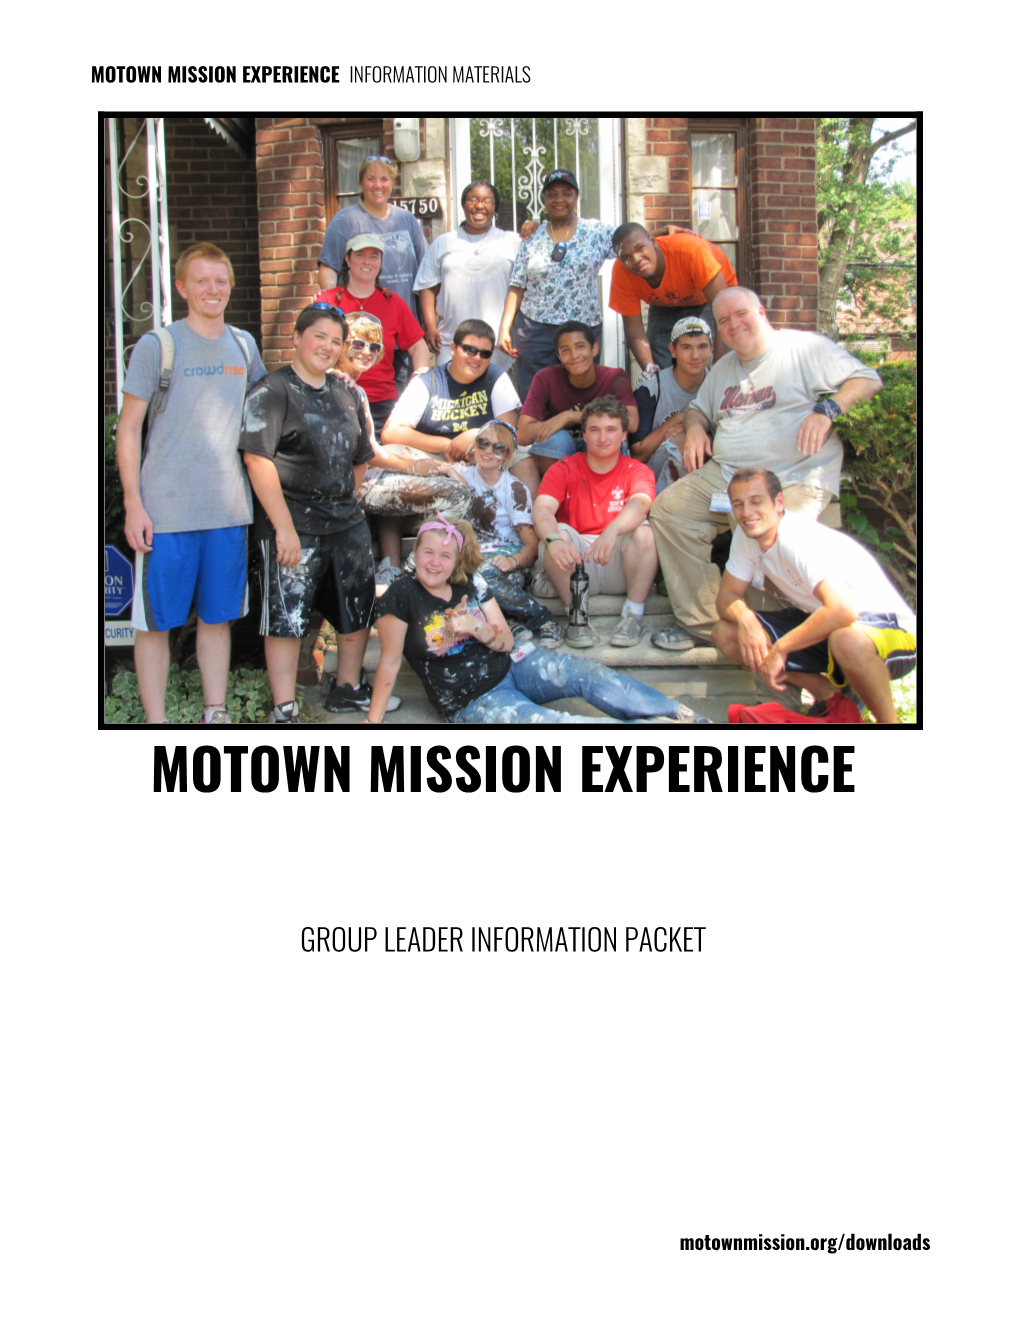 Motown Mission Experience Information Materials